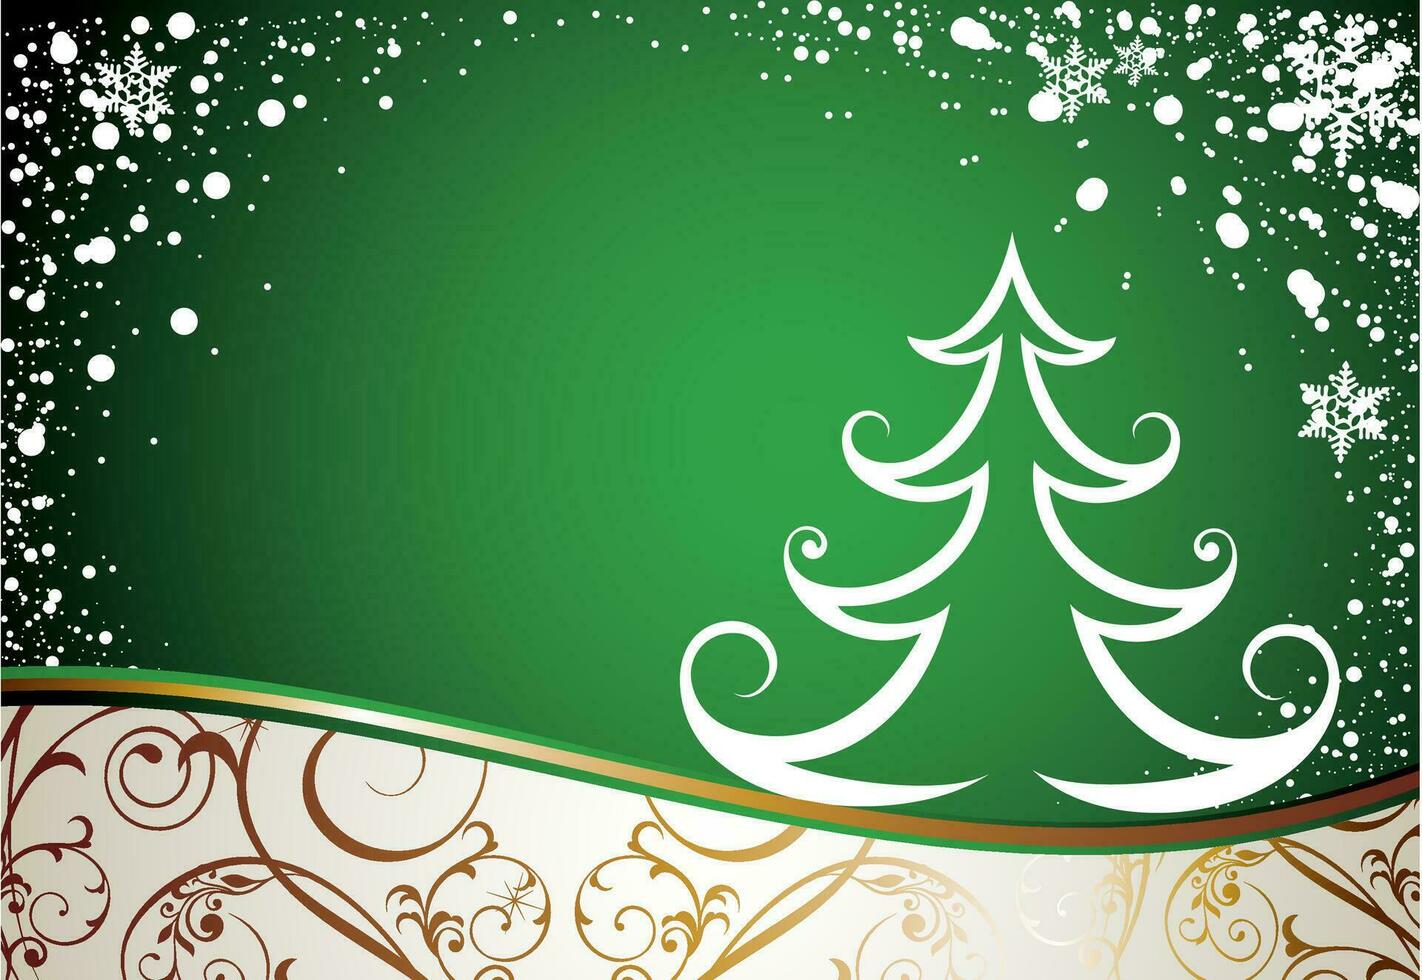 Cristmas tree. Merry Christmas Background with snowflakes vector